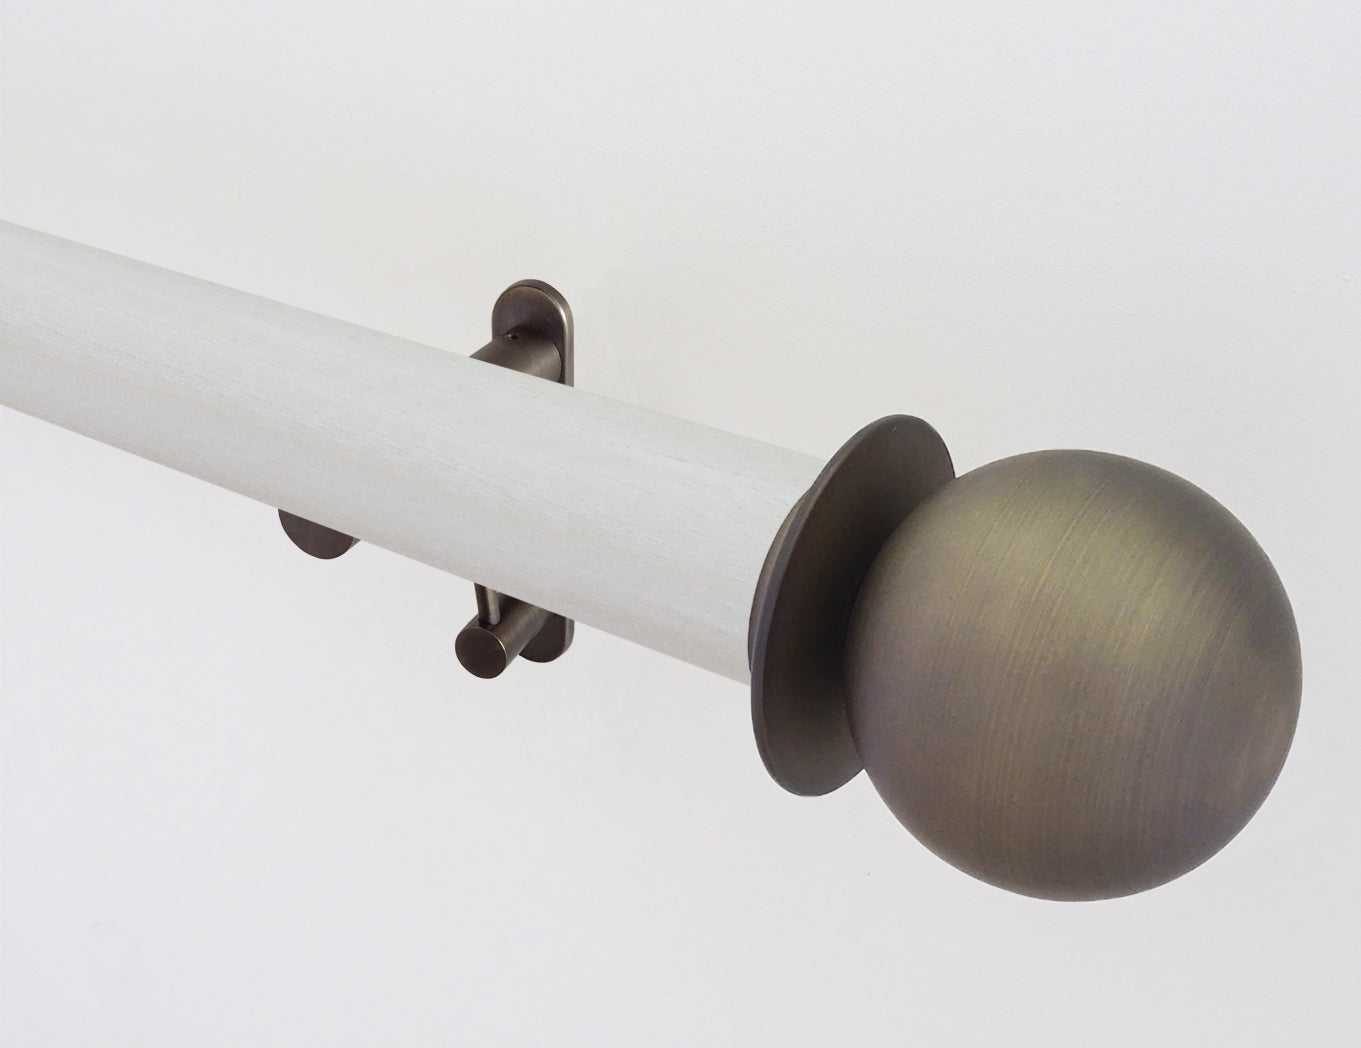 50mm dia. ecru stained wood curtain pole with metal ball finials